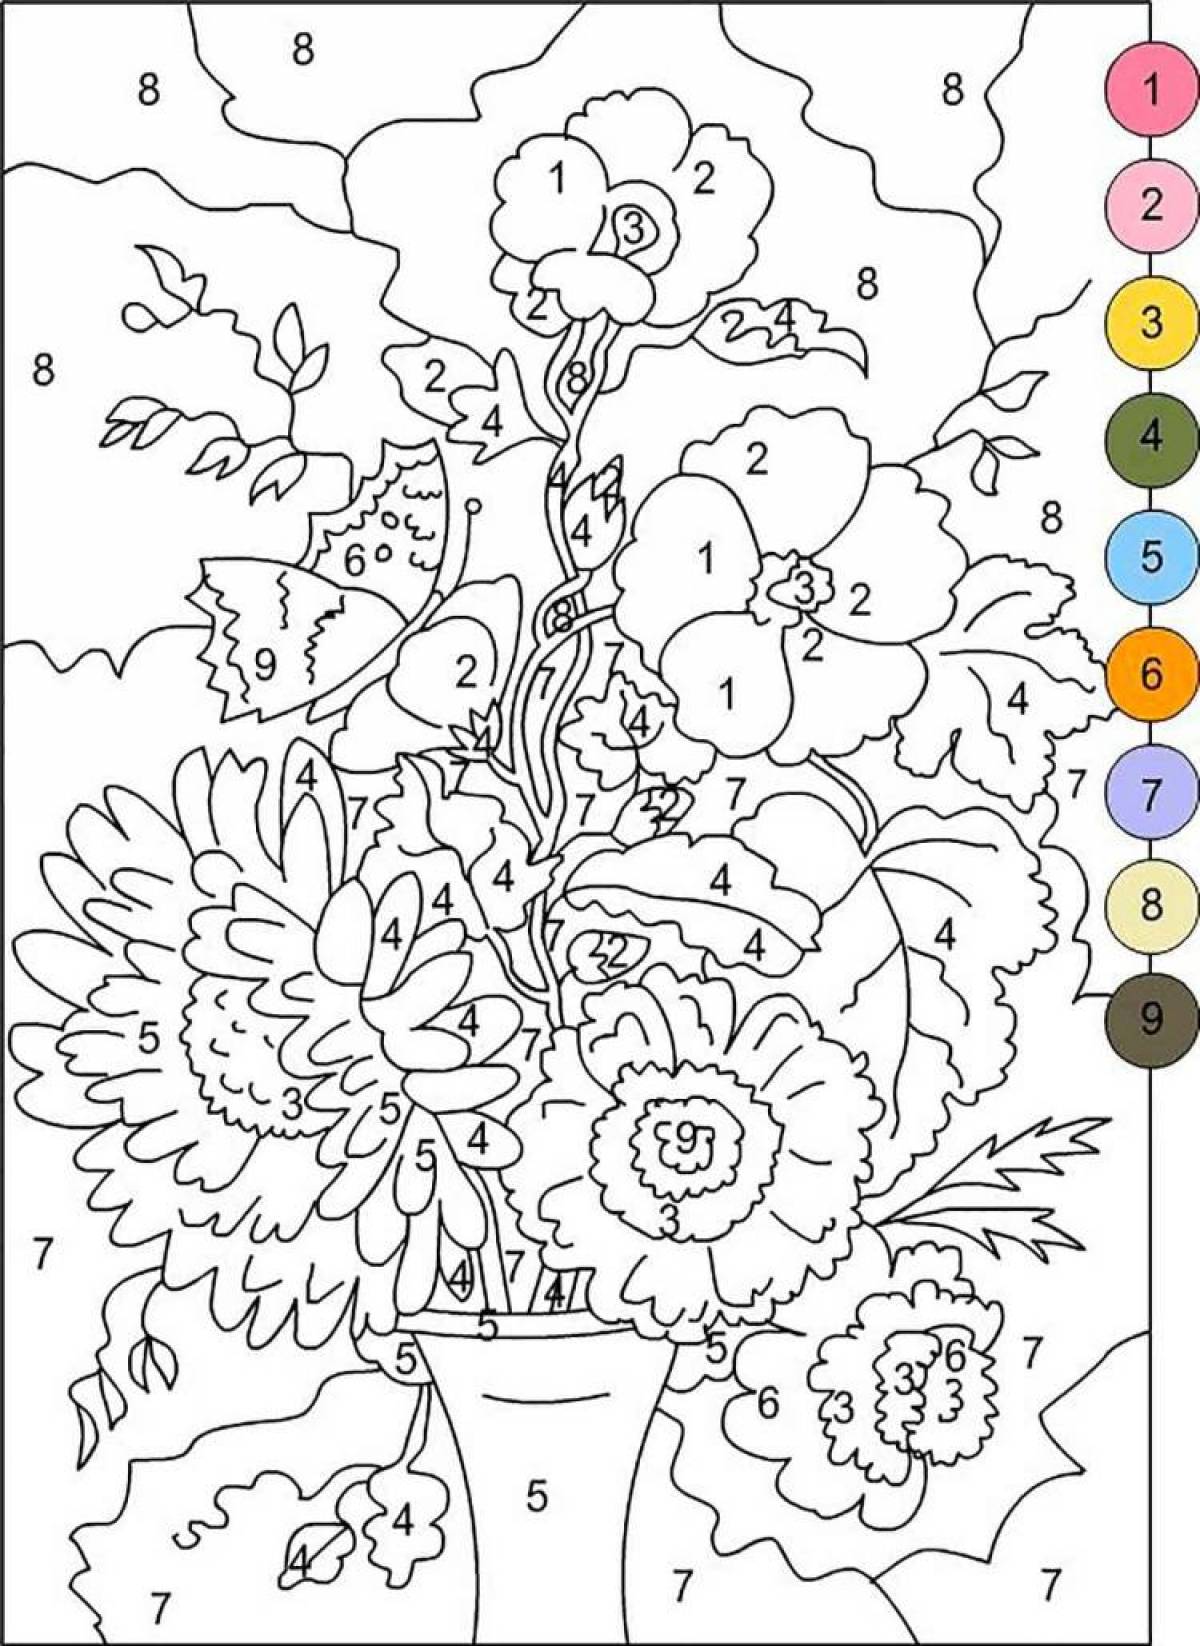 Fun coloring by numbers for all adults